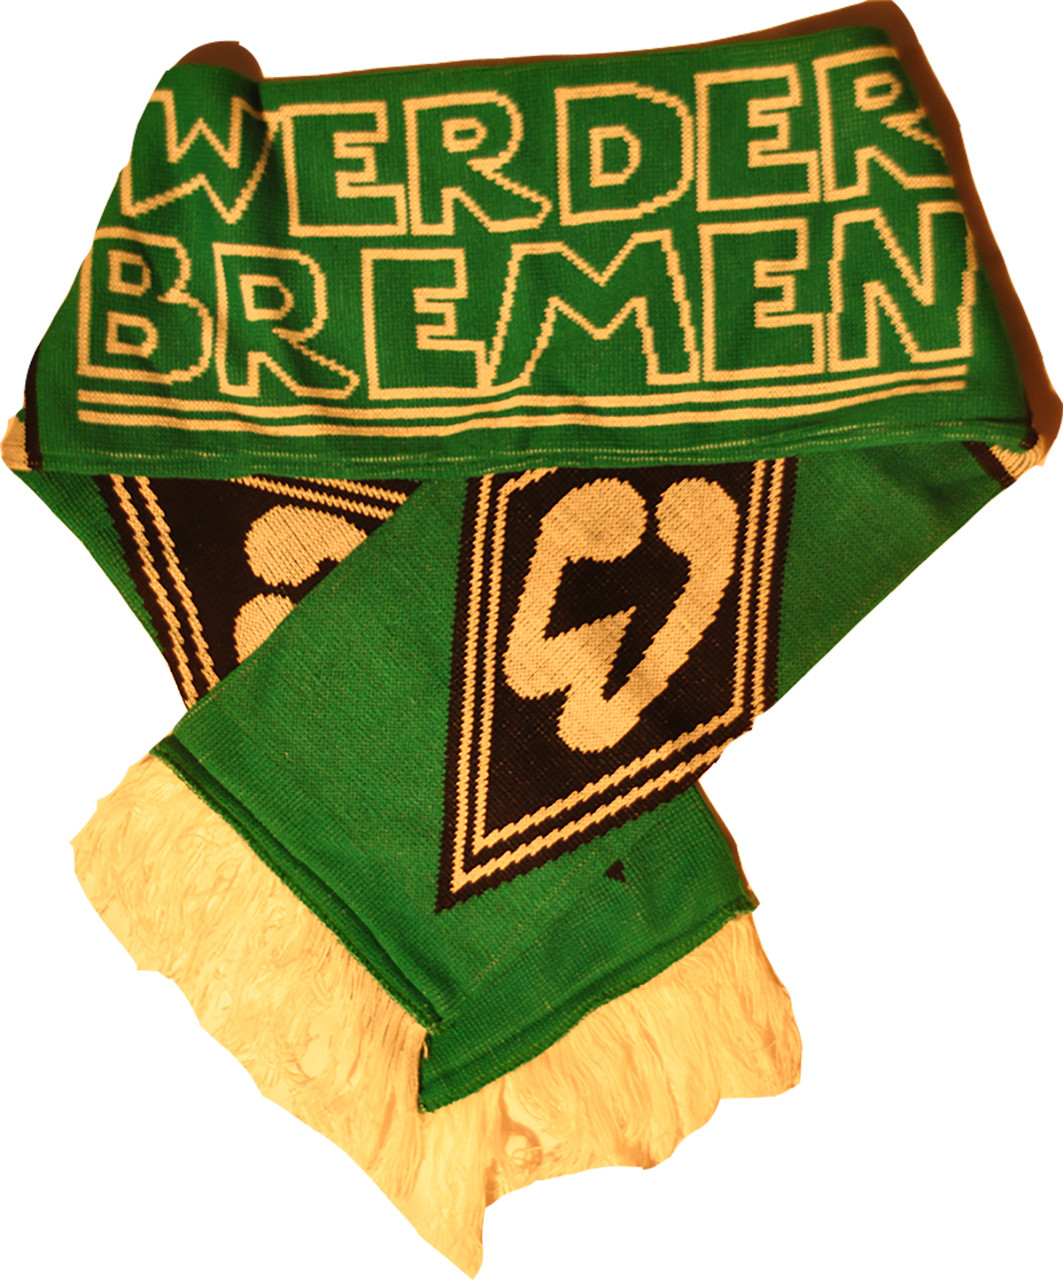 WERDER BREMMEN Football Scarves NEW from Superior Acrylic Yarns 